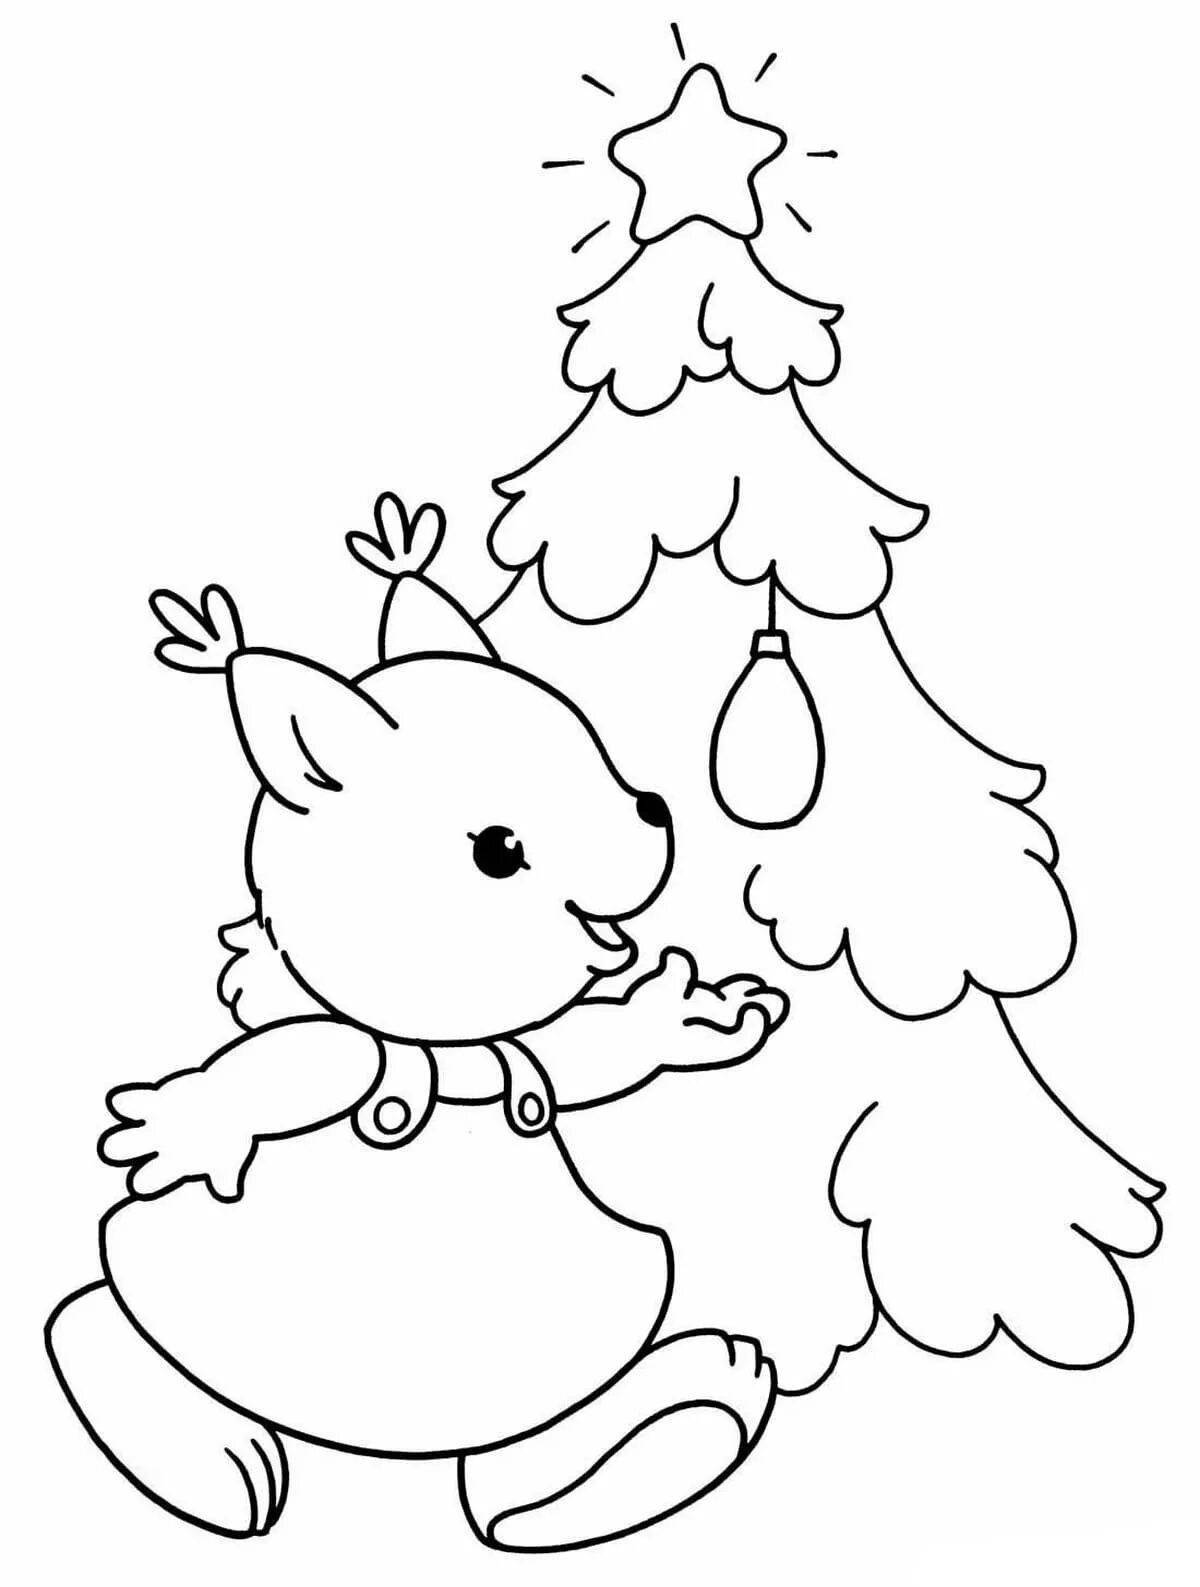 Magical Christmas coloring book for kids